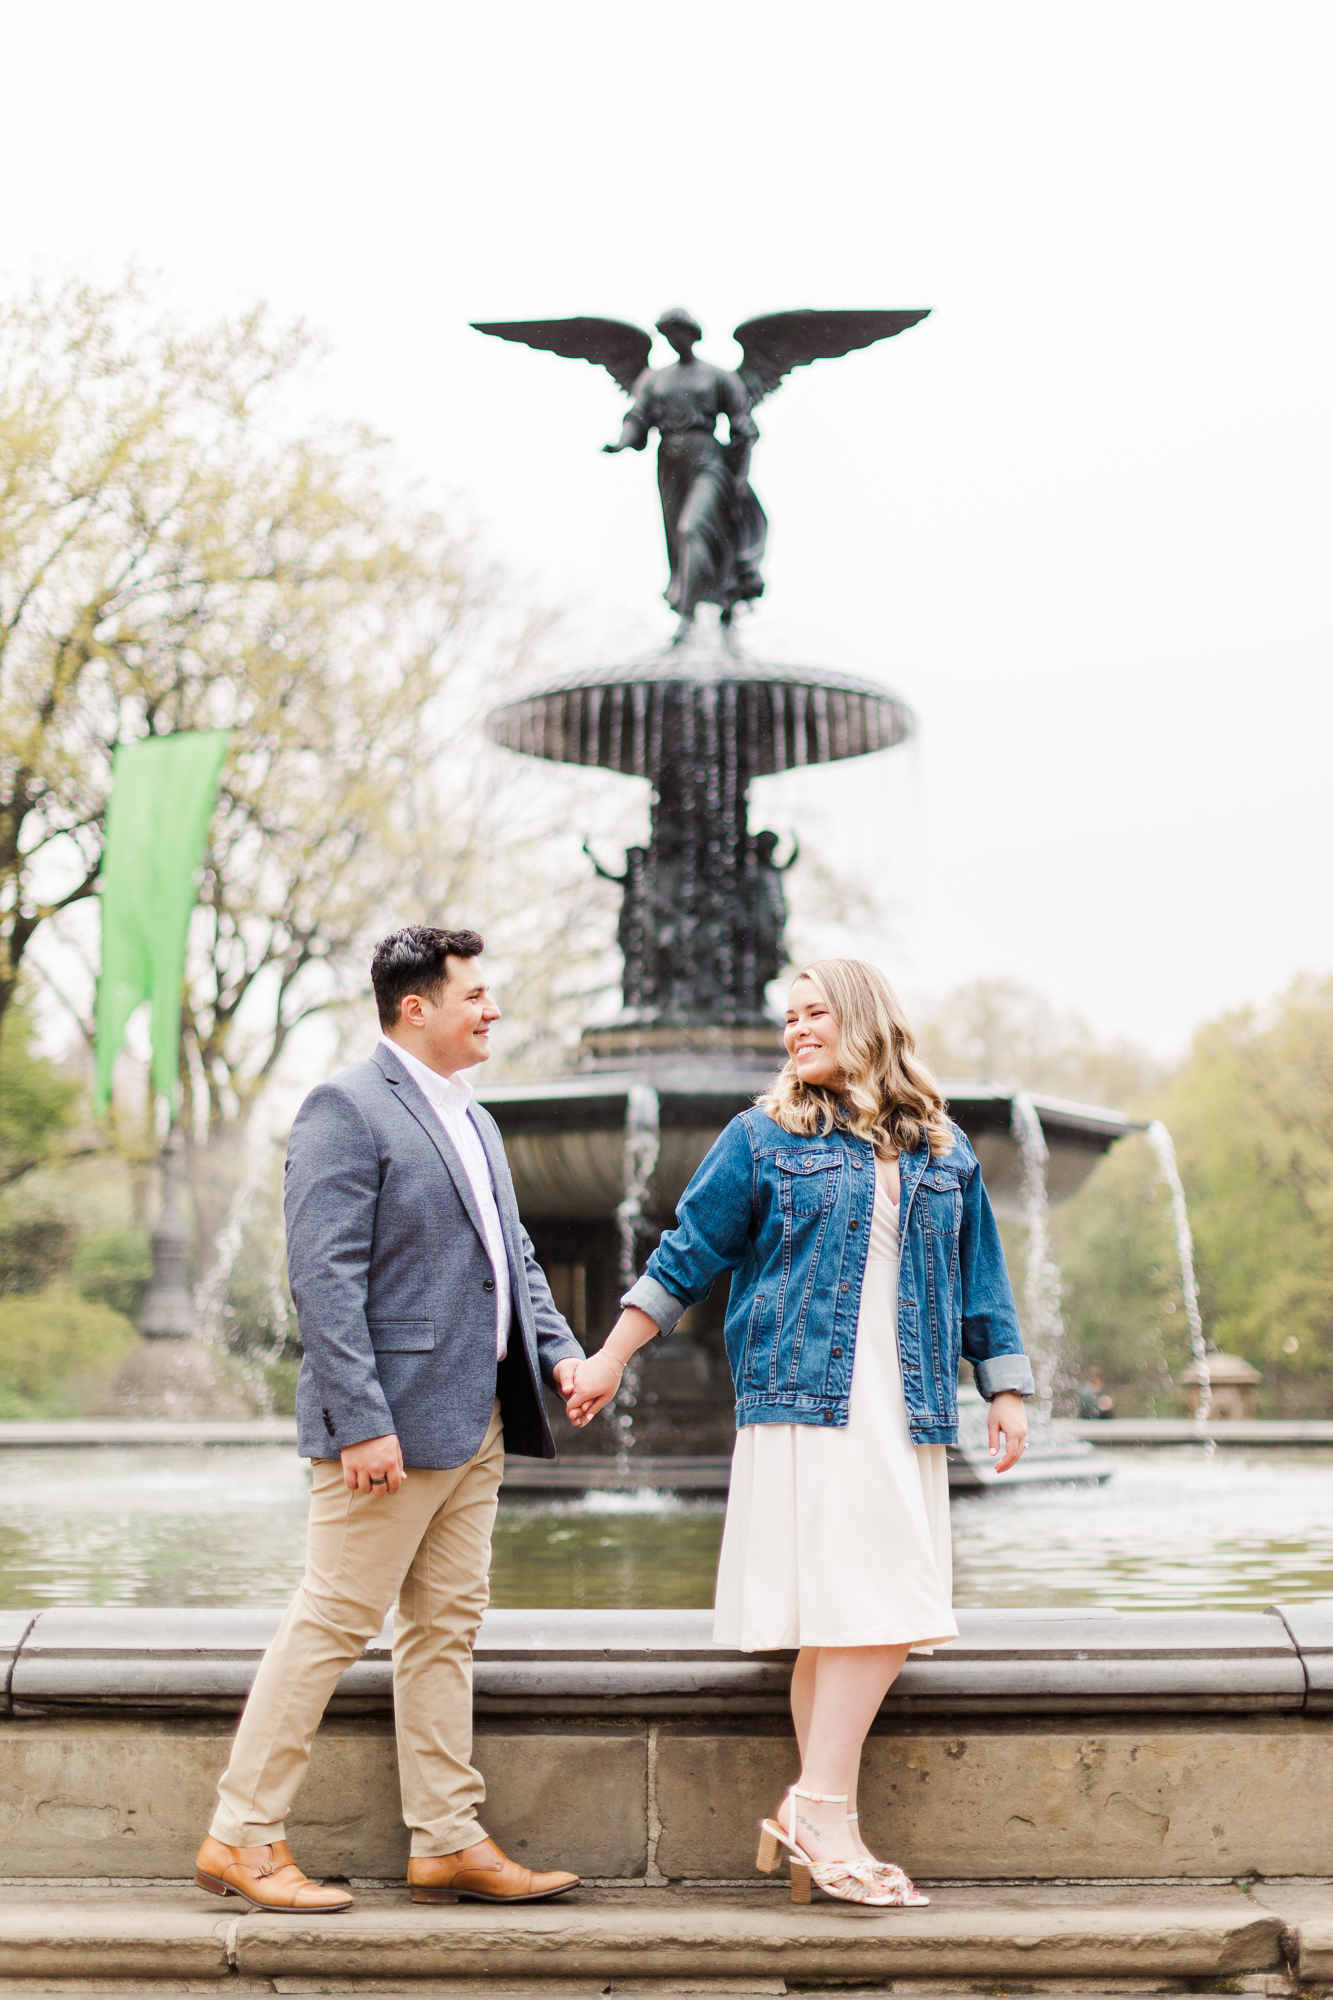 Special Engagement Pictures in Central Park